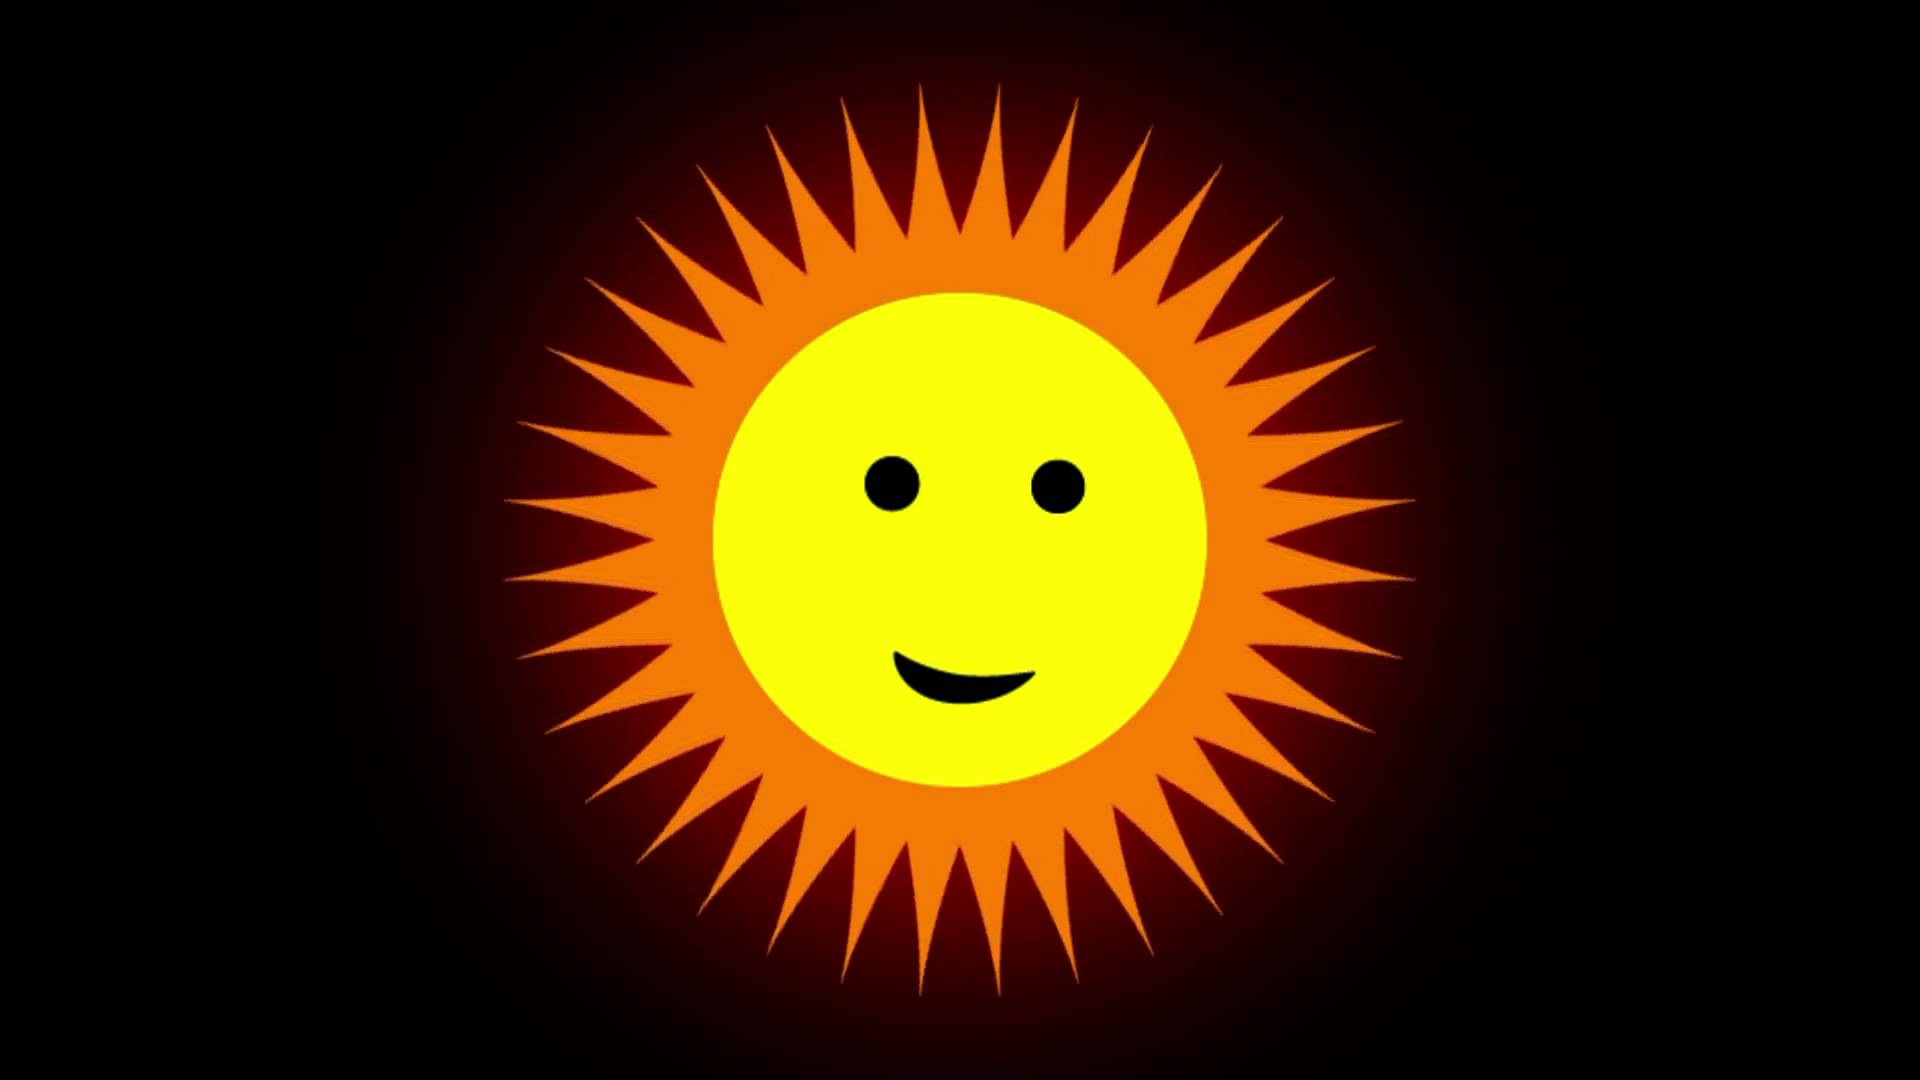 Winking Sun Animation (After Effects CS5) - YouTube